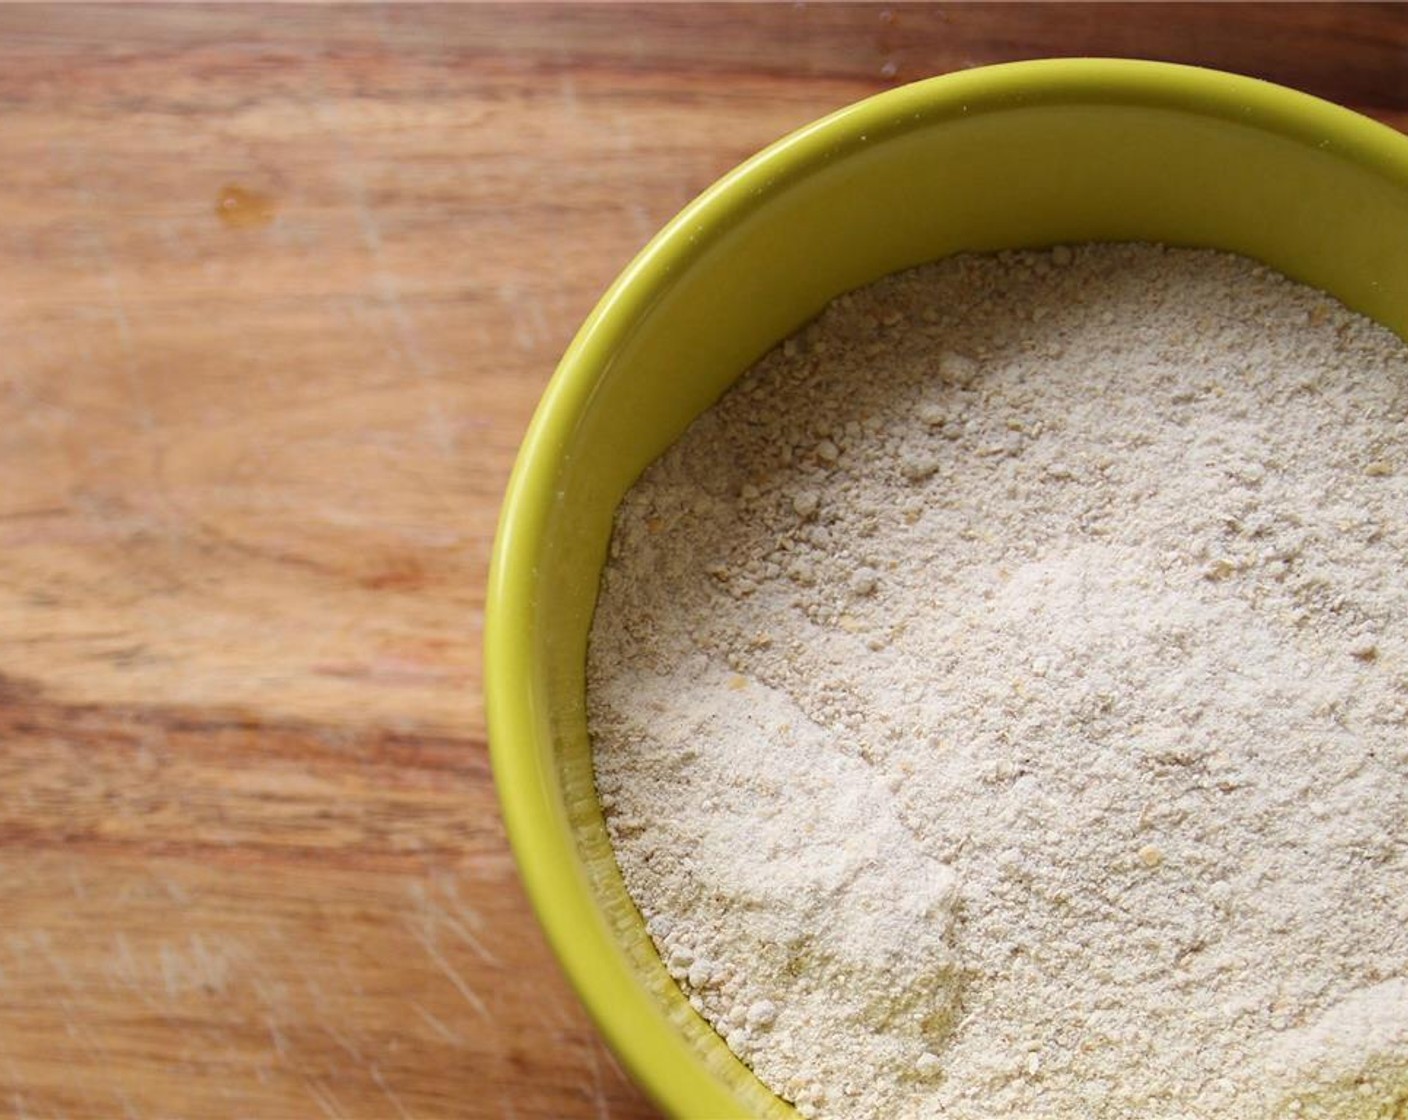 step 2 Combine the Oat Flour (1/2 cup), Sweet Glutinous Rice Flour (1/2 cup), Almond Meal (3 Tbsp), Pure Cane Sugar (2 Tbsp), Baking Powder (1 tsp), Salt (1/2 tsp), and Ground Cinnamon (1/4 tsp) in a large bowl, mixing until well combined.